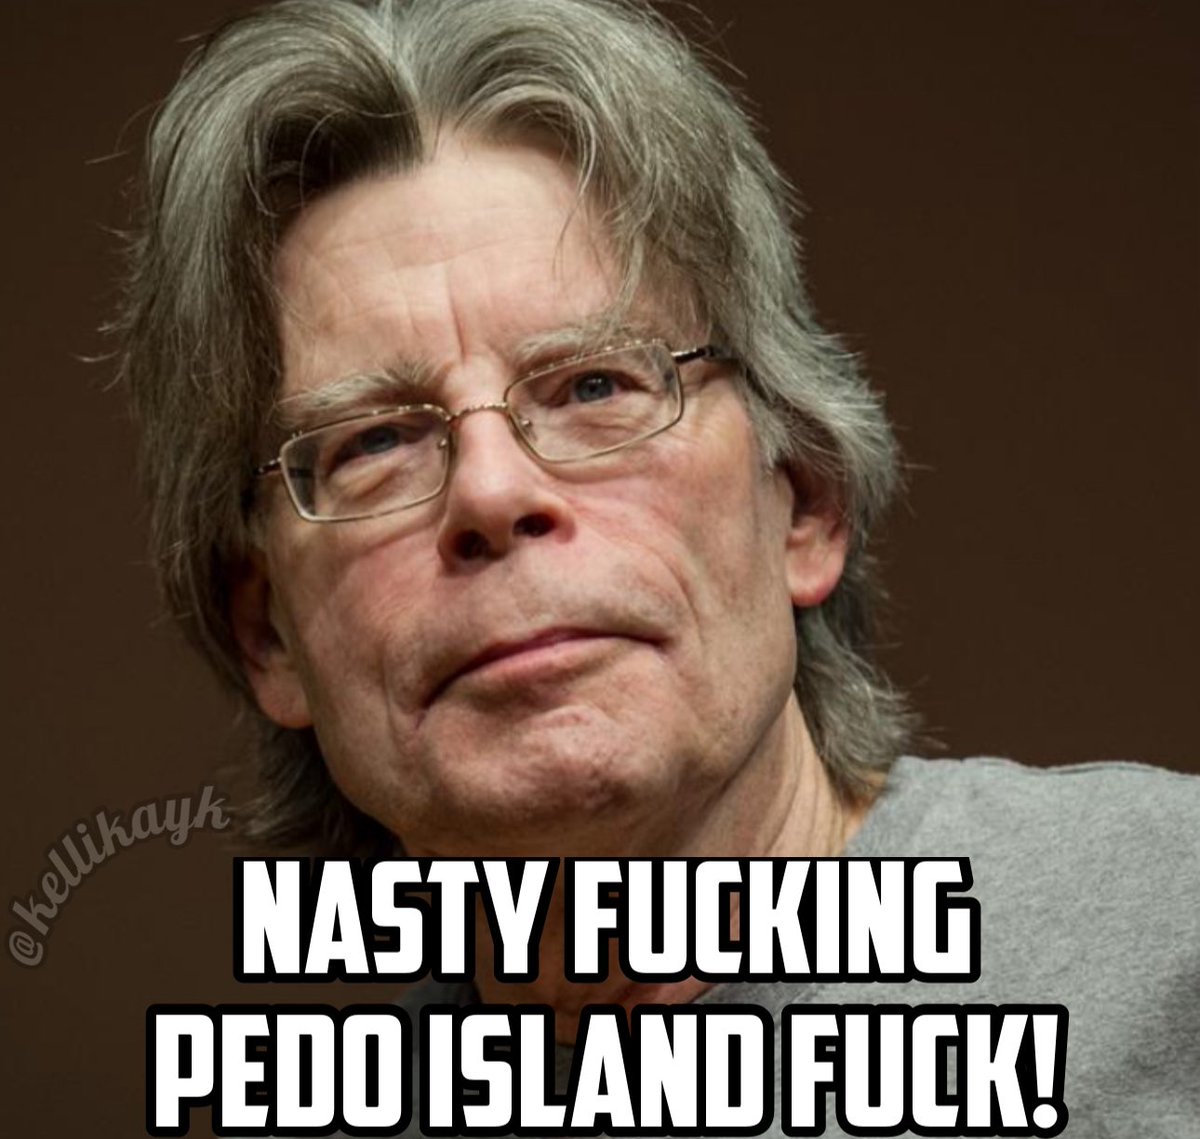 It took Stephen King 45 years to write his new book “You like it darker” 🙄 Sick fk. We know what you like 🖕 Who will never spend one fucking dime on King’s crappy books? 🙋‍♀️